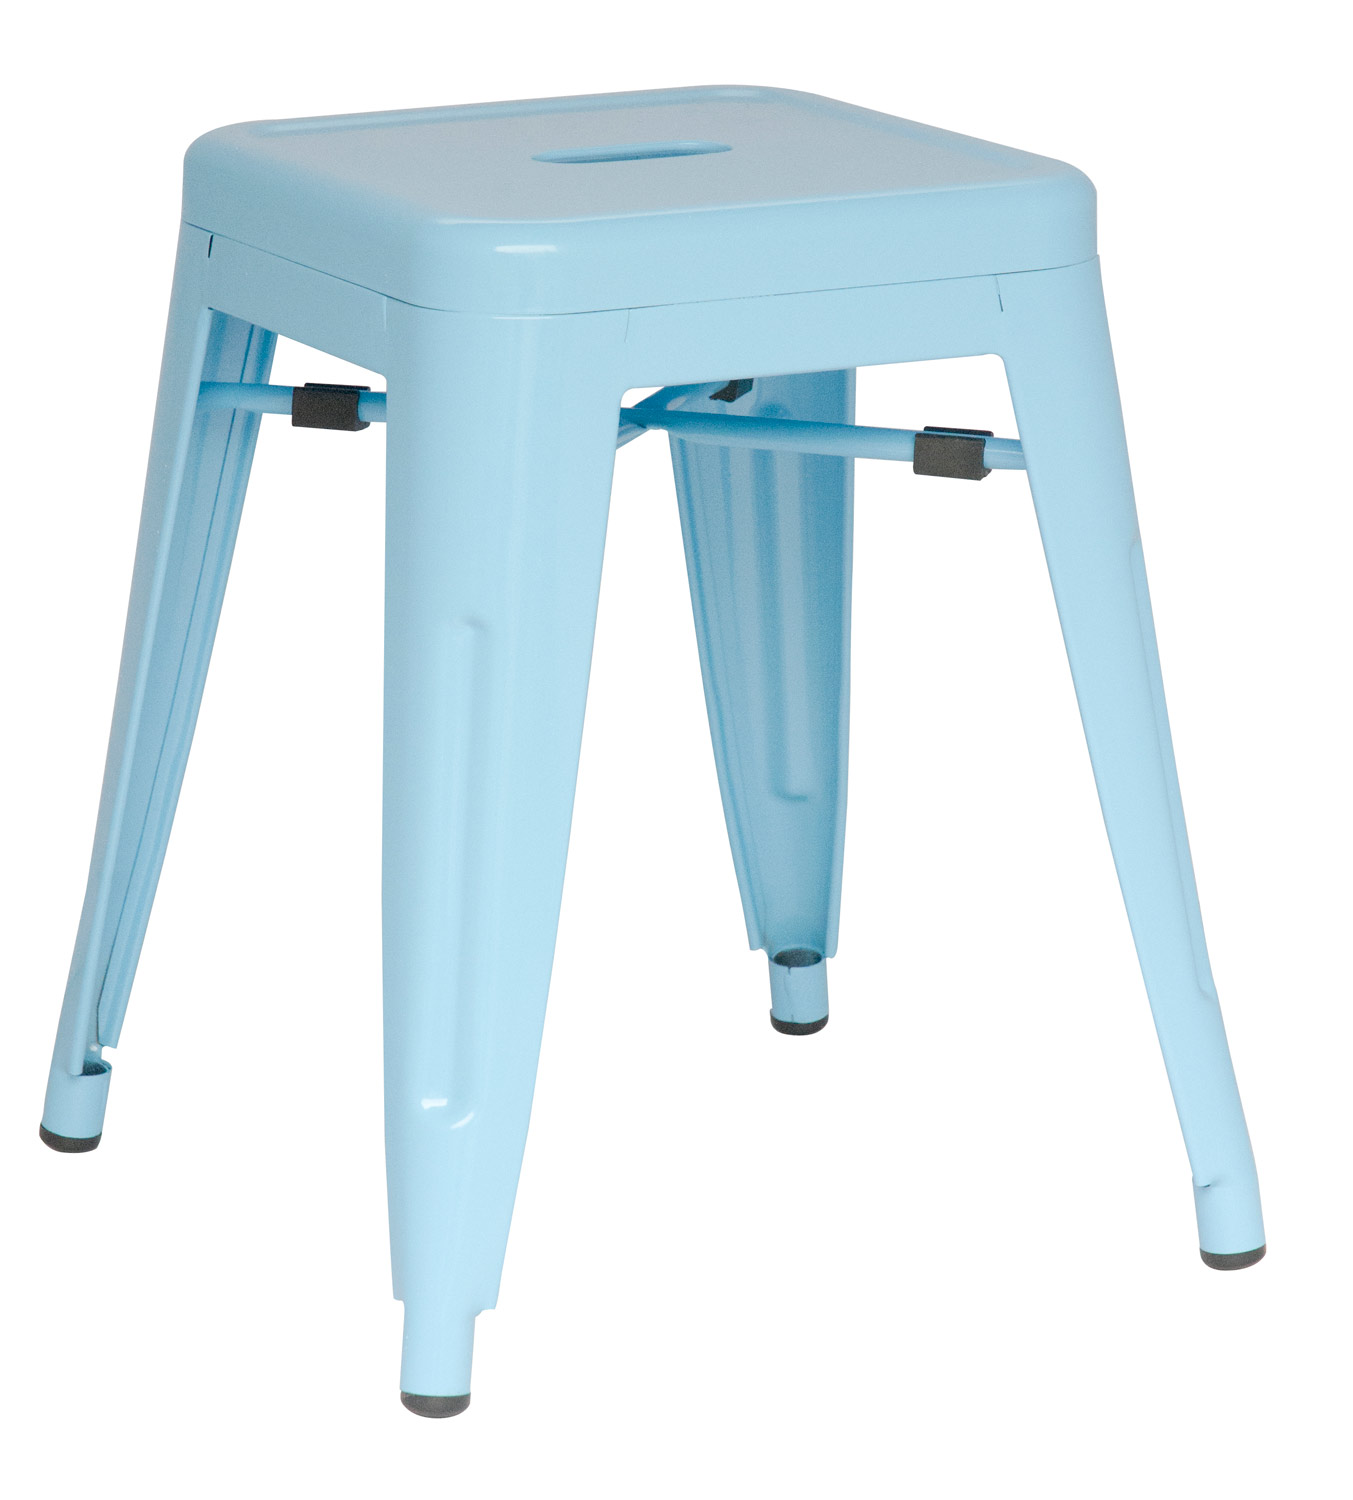 Chintaly Imports 8018 Galvanized Steel Side Chair - Sky Blue